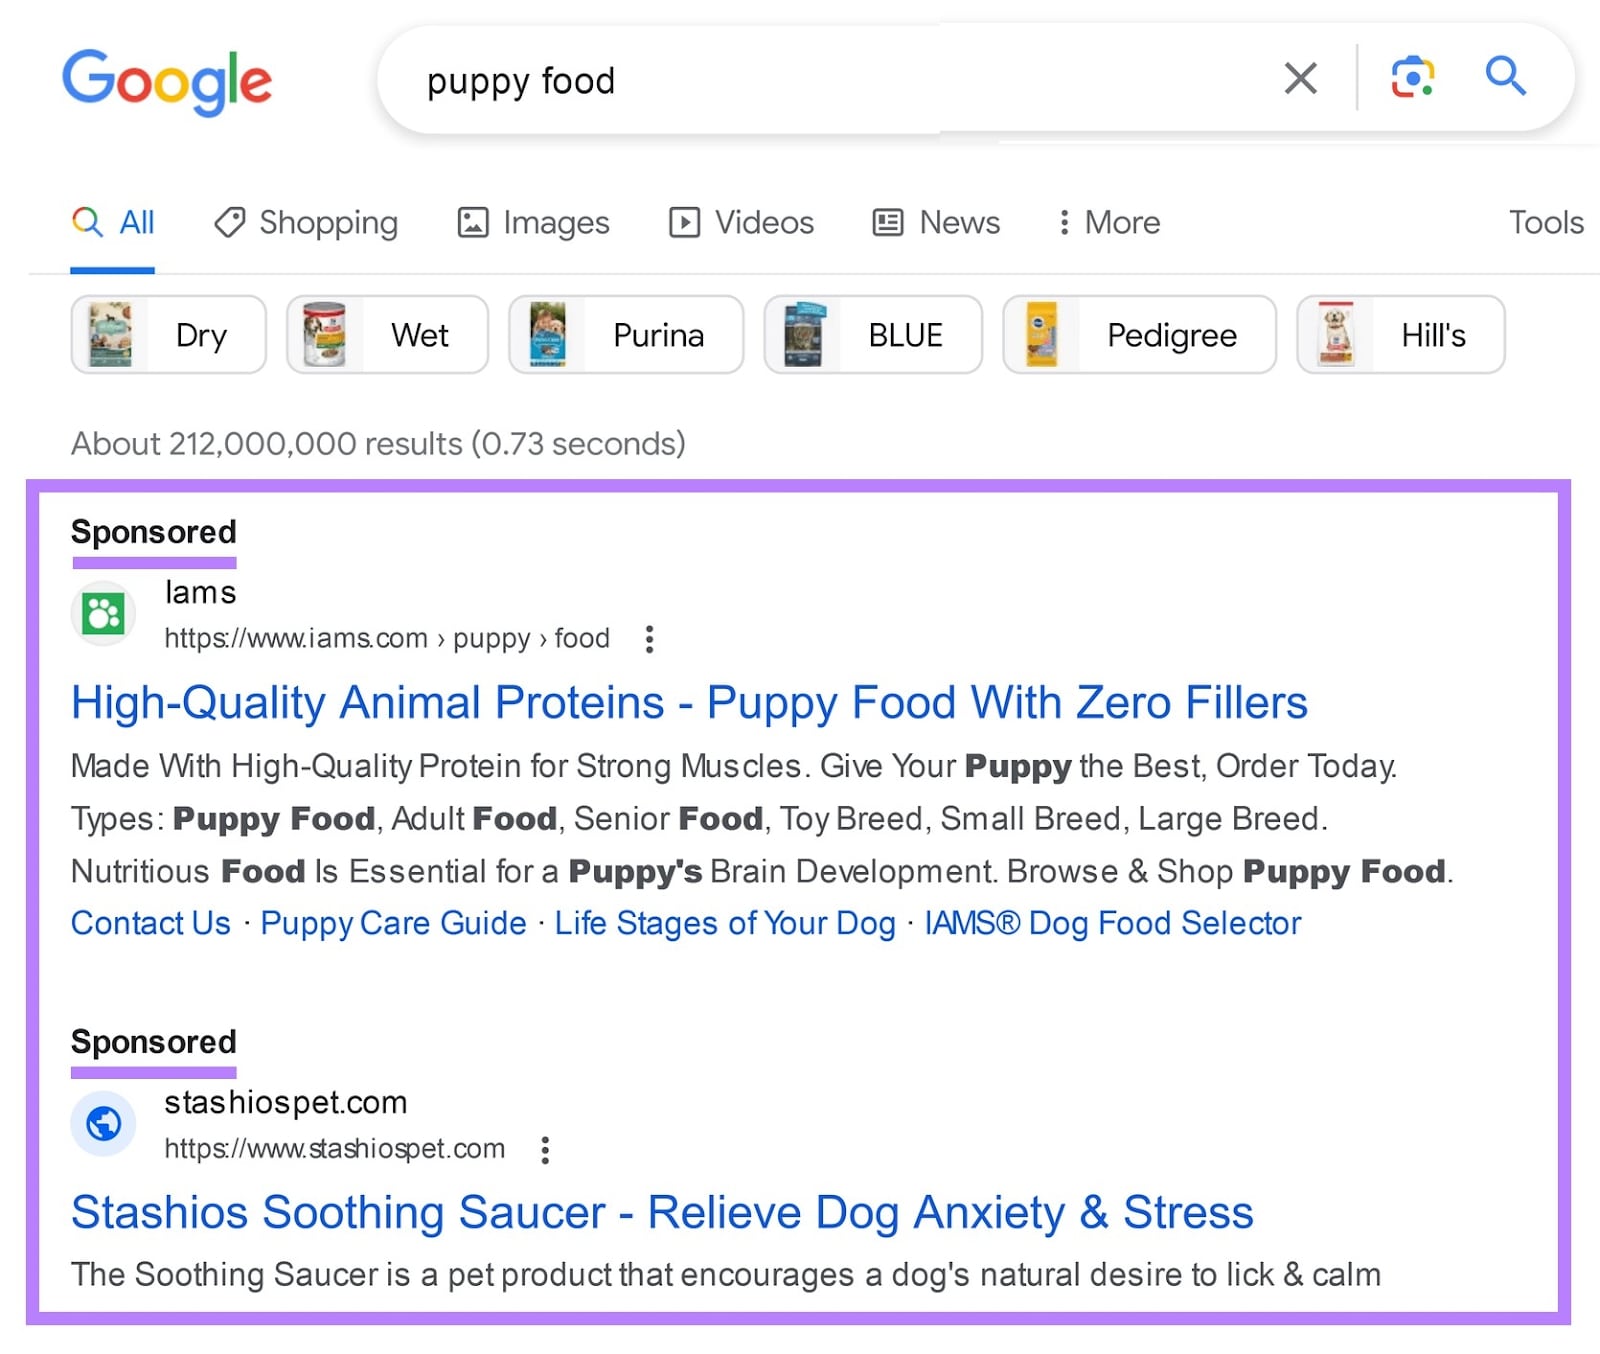 PPC search ads for "puppy food" on Google's SERP